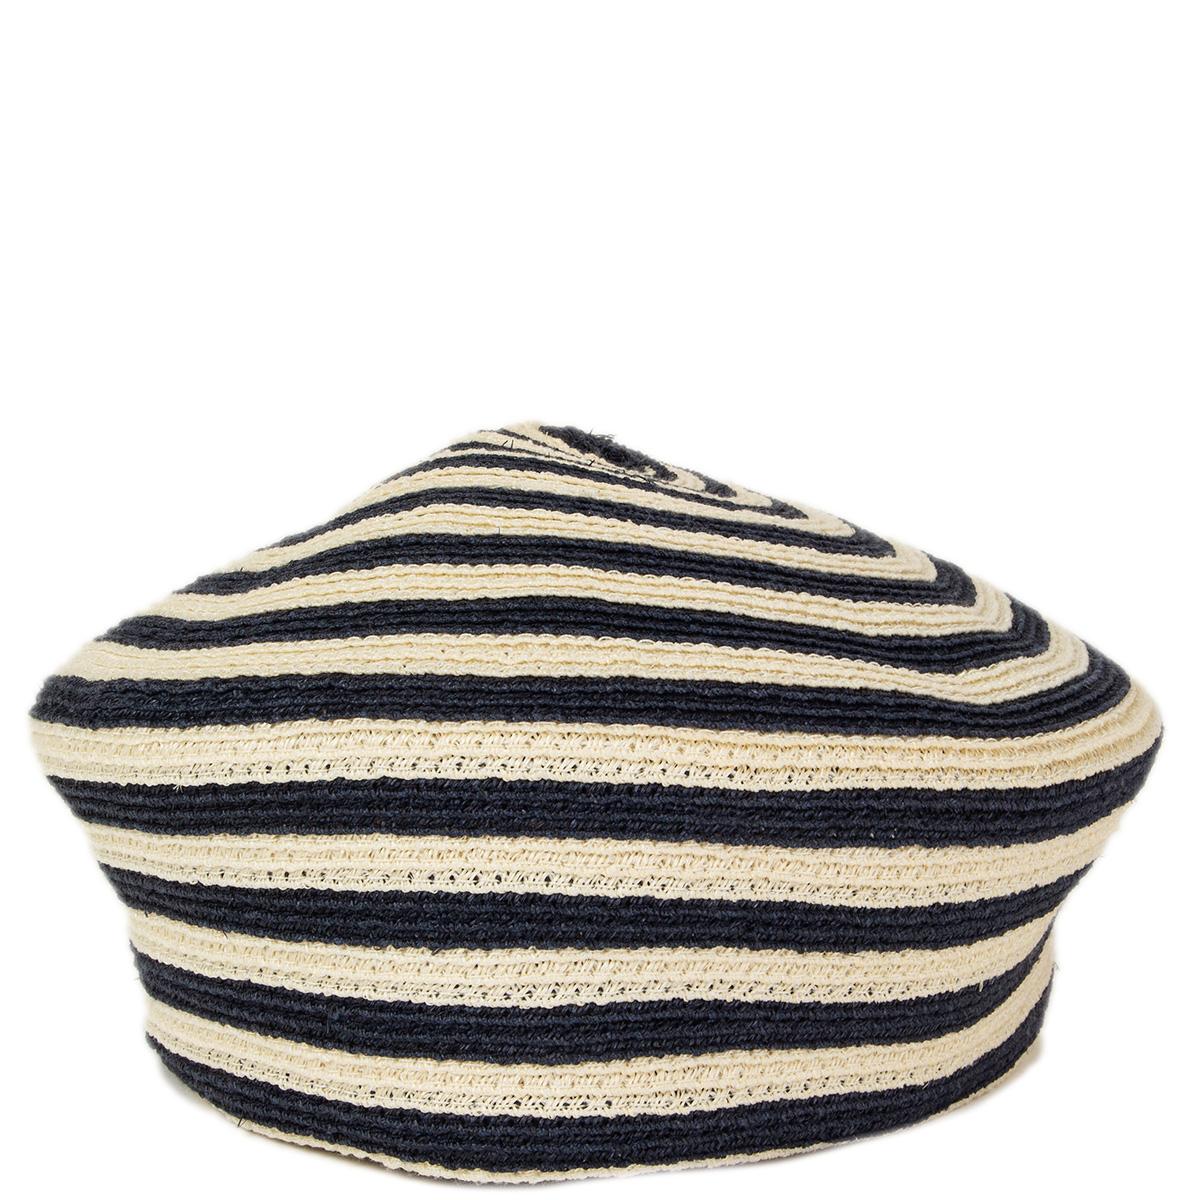 100% authentic Gucci woven hemp and cotton-blend beret features navy and off-white stripes and an internal black grosgrain browband to keep it in place. Brand new without tag.

Measurements
Tag Size	57 
Size	M
Inside Circumference	54cm (21.1in)

All